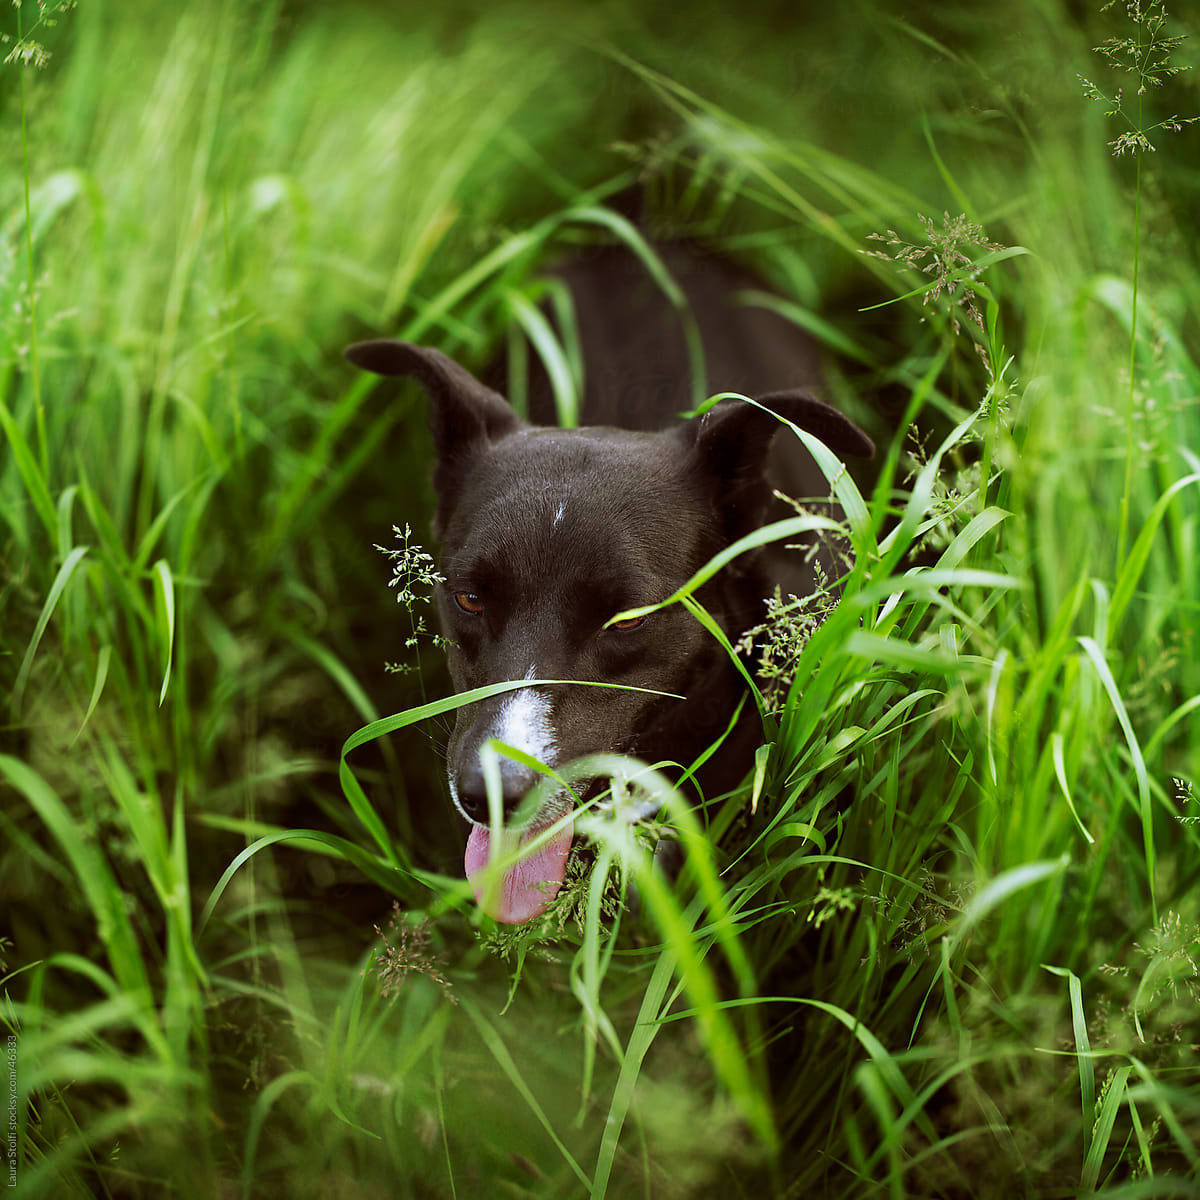 Dog out for a walk takes a rest in green grass field